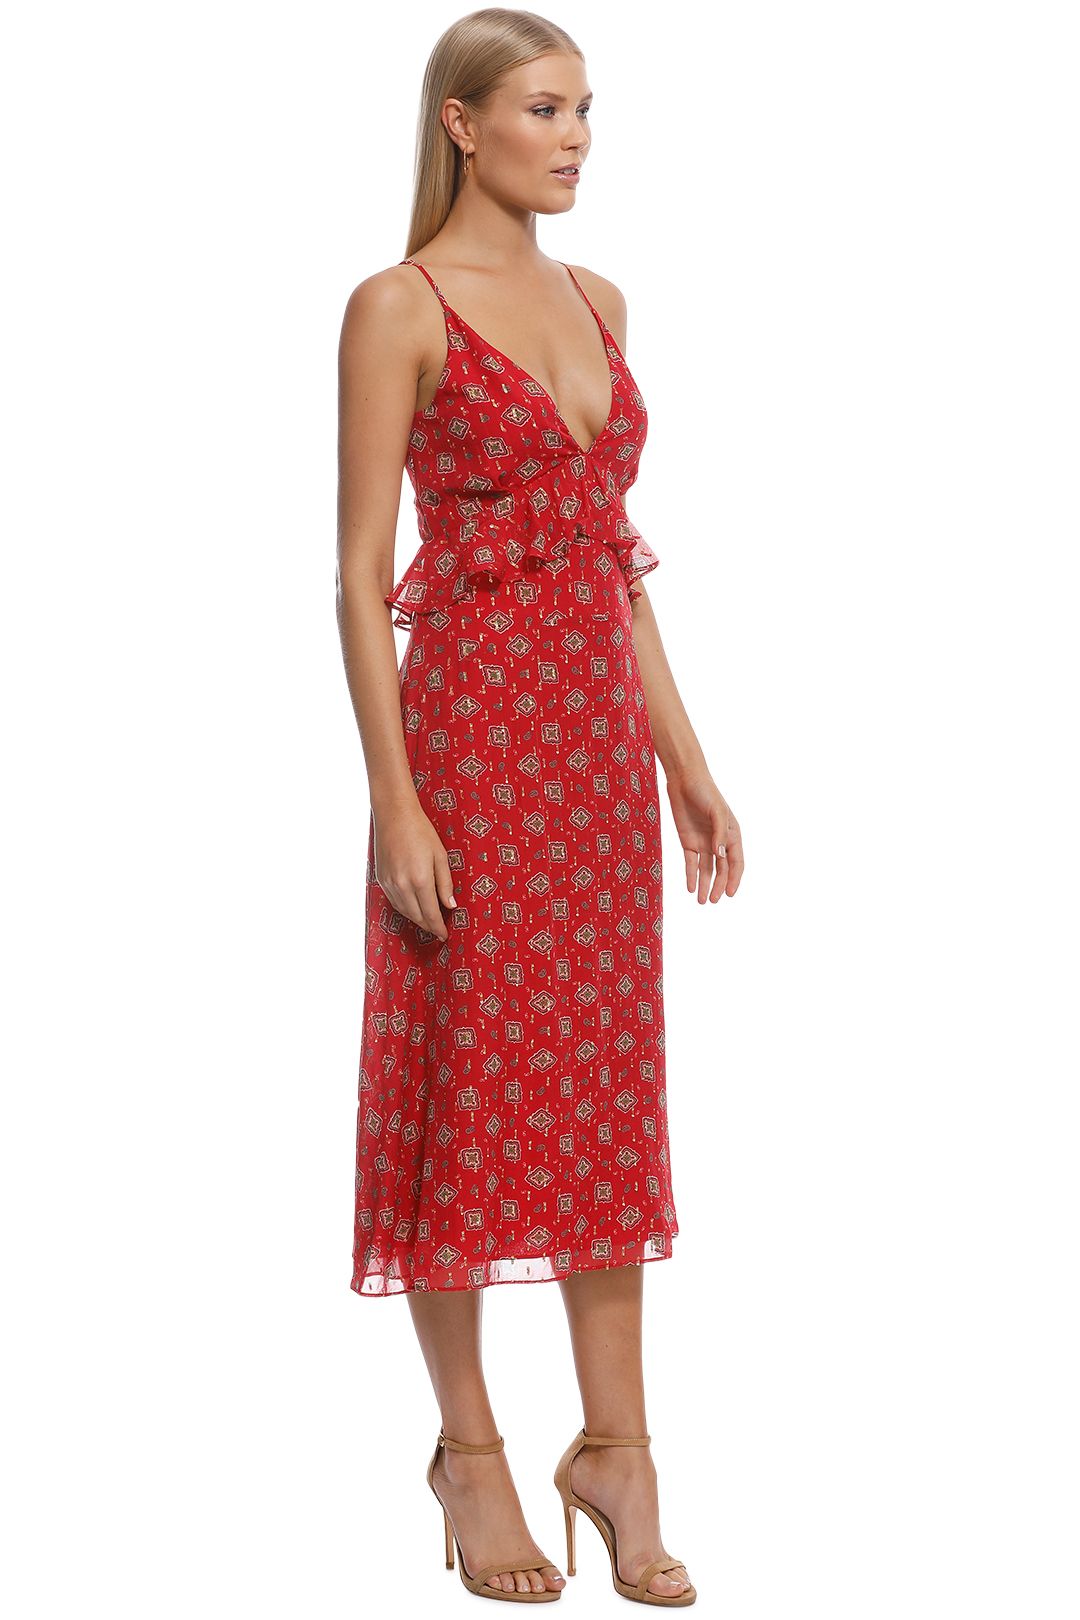 Stevie May - Here We Go Midi Dress - Red - Side